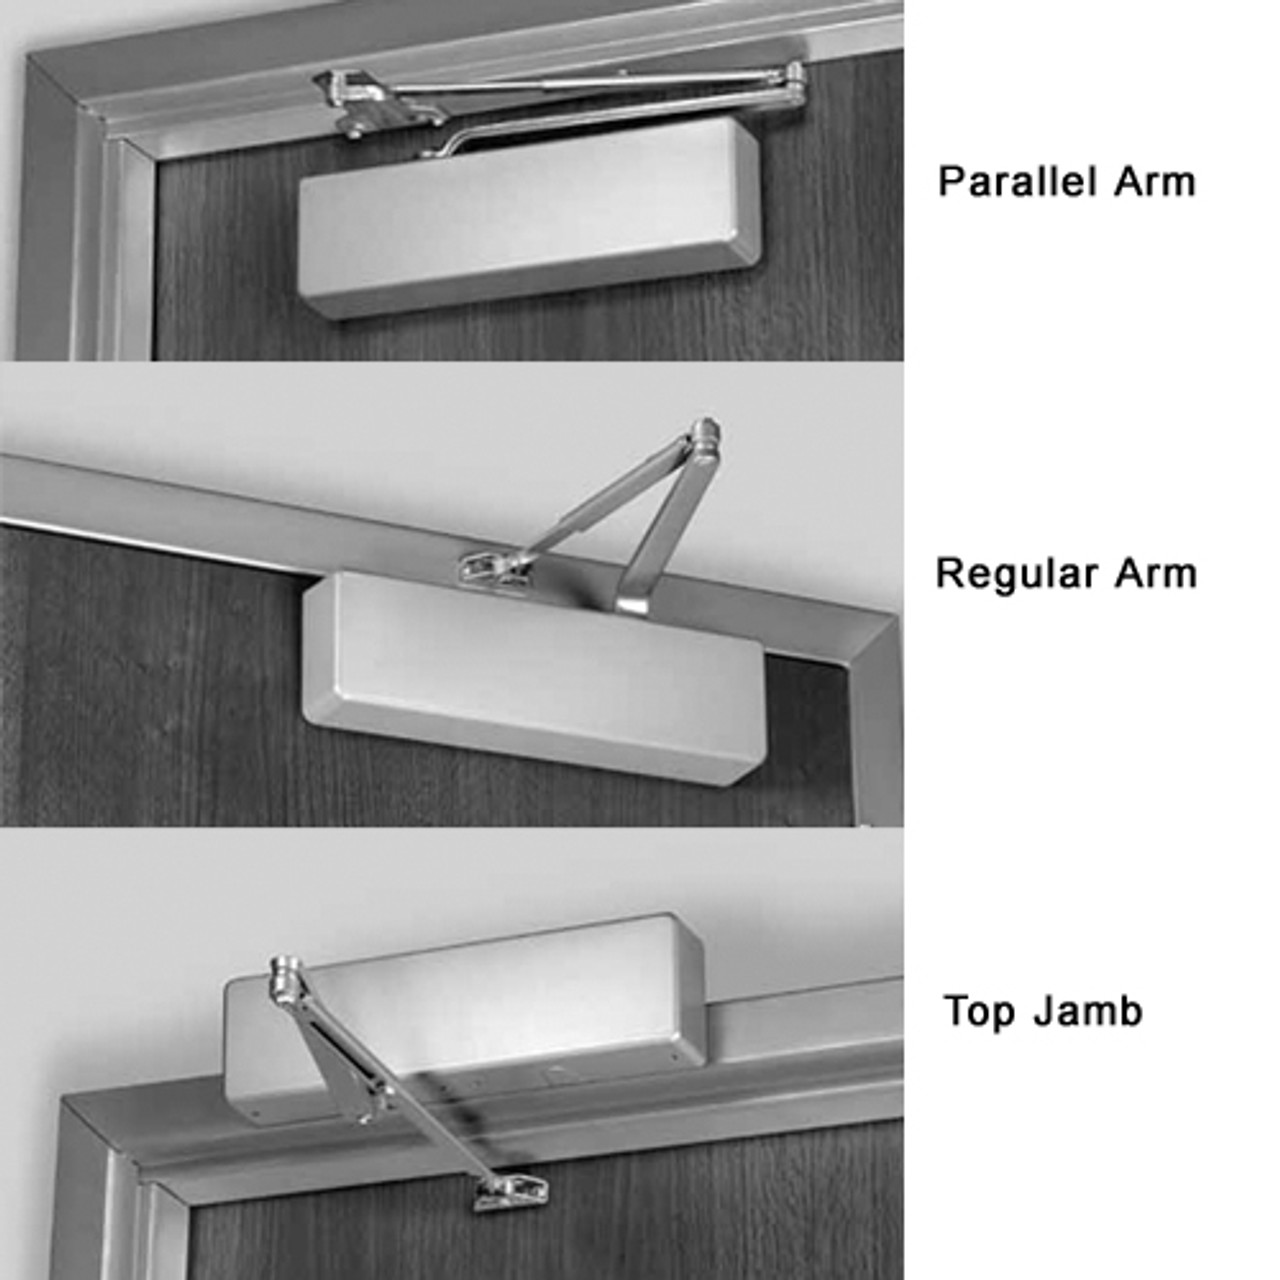 7500M-691 Norton 7500 Series Non-Hold Open Institutional Door Closer with Regular Parallel or Top Jamb to 3 inch Reveal in Dull Bronze